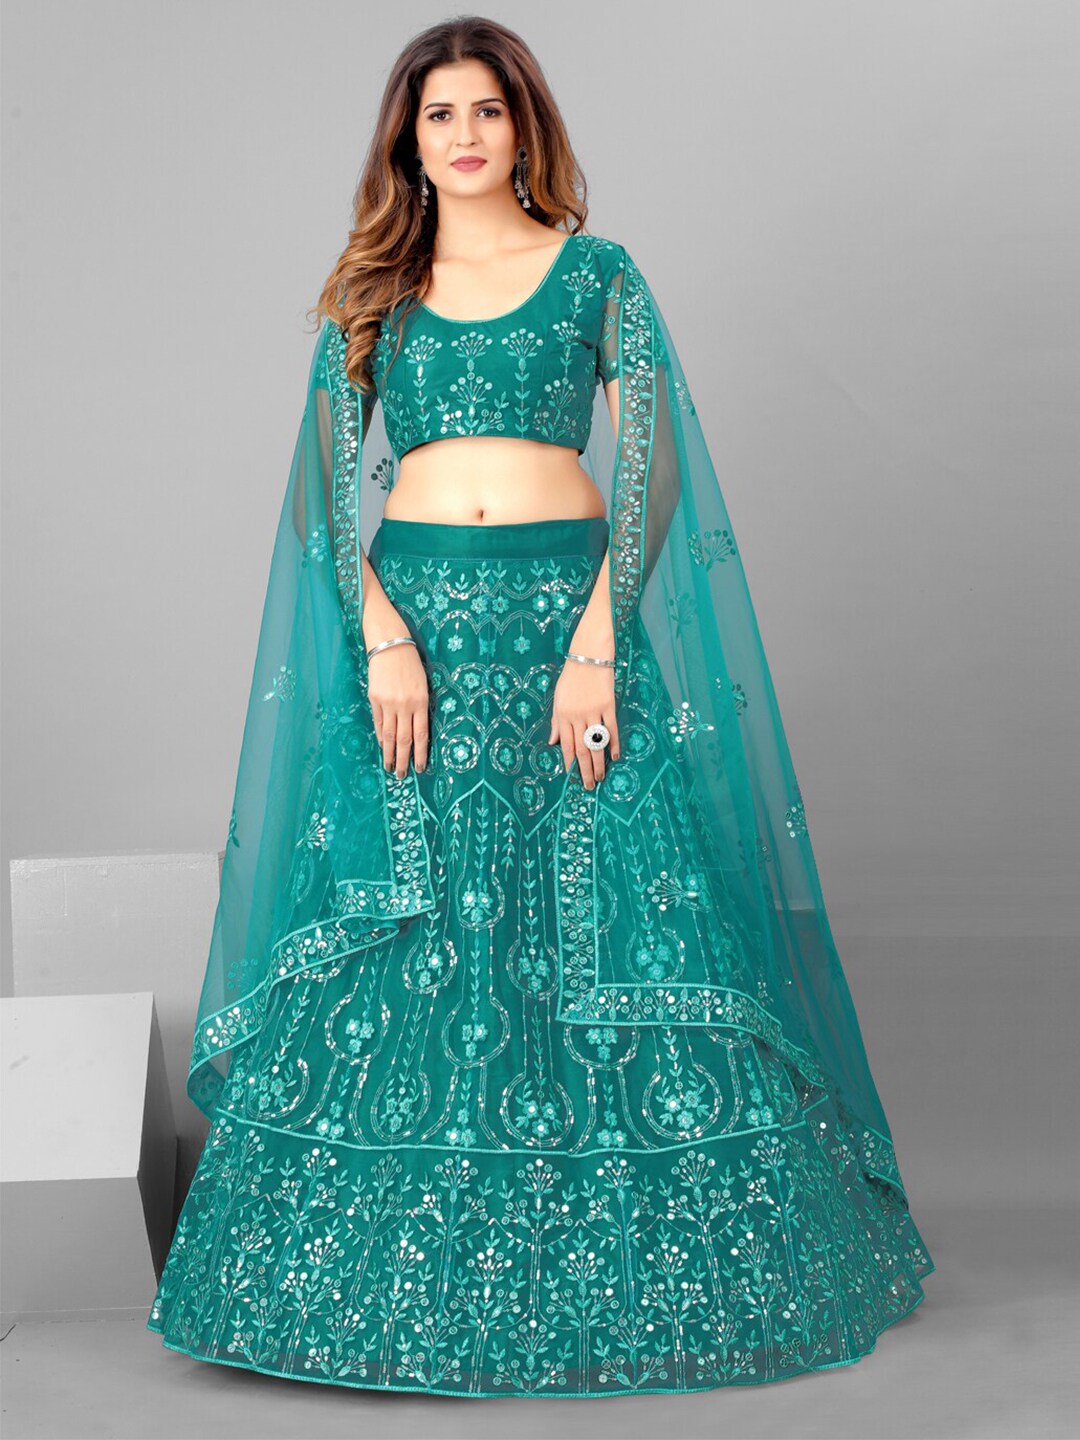 SHOPGARB Women Teal Embroidered Semi-Stitched Lehenga & Blouse with Dupatta Price in India